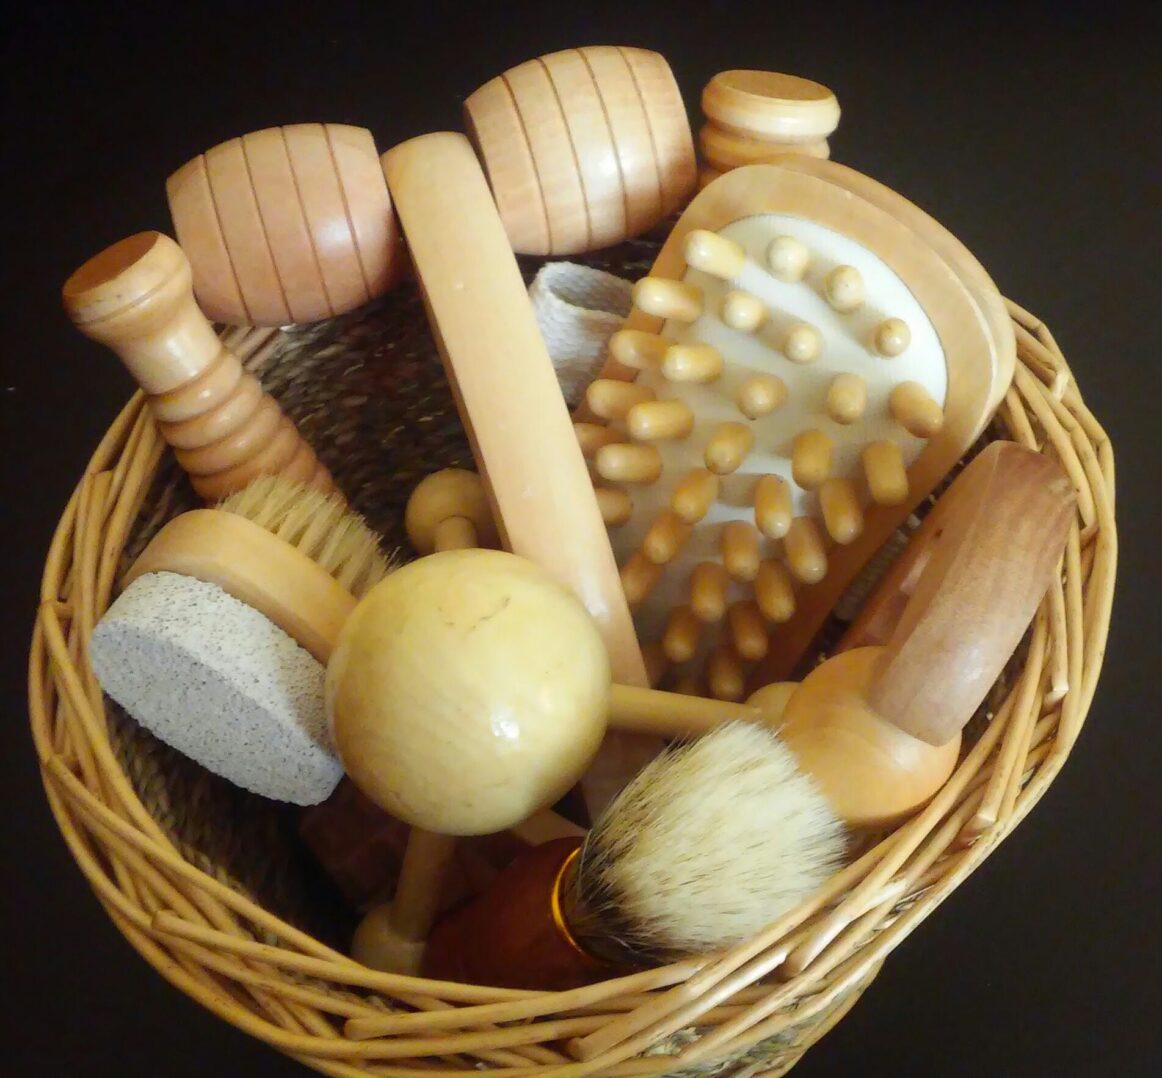 A collection of wooden massage tools and brushes in a woven basket.